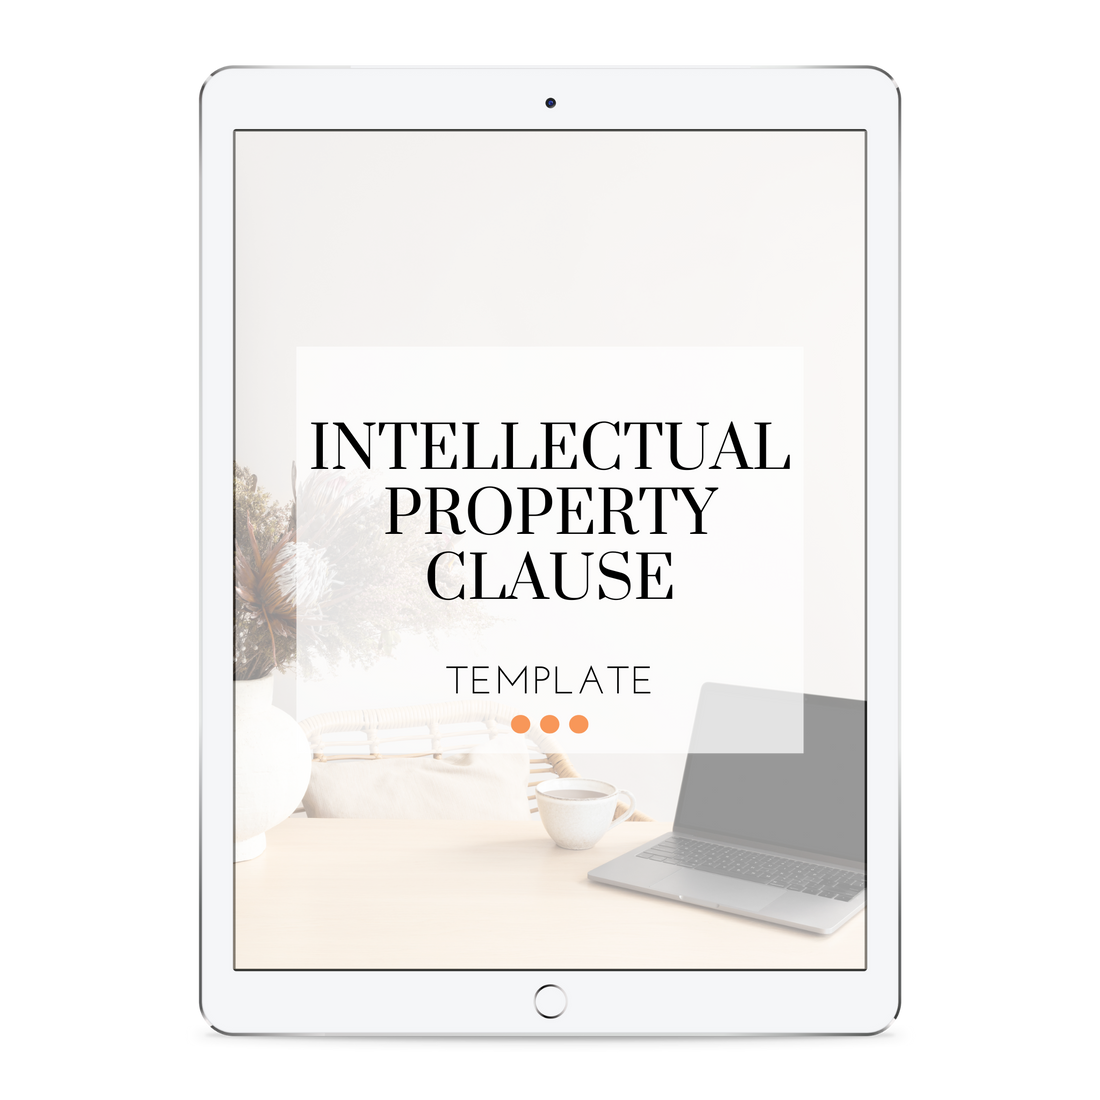 mockup of intellectual property clause template